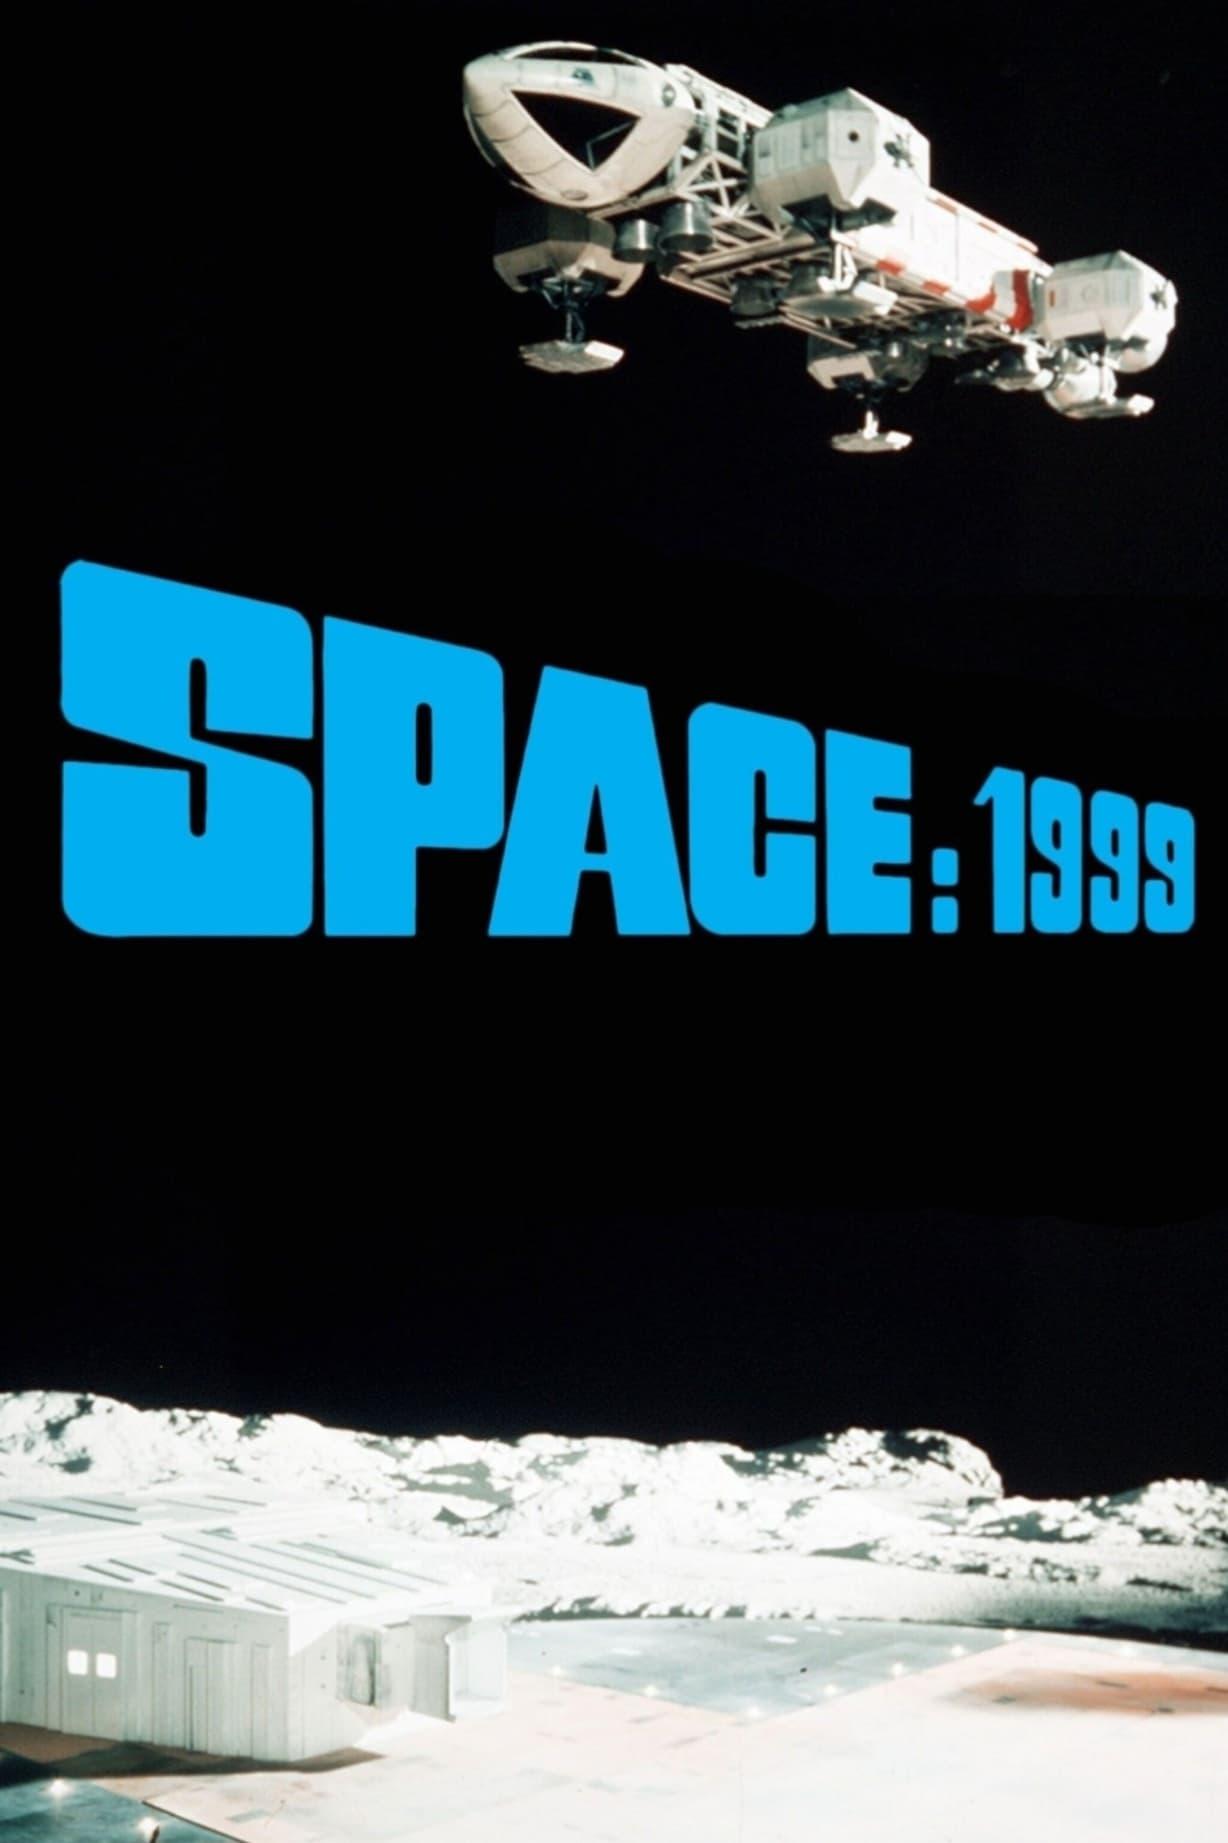 Space 1999 poster